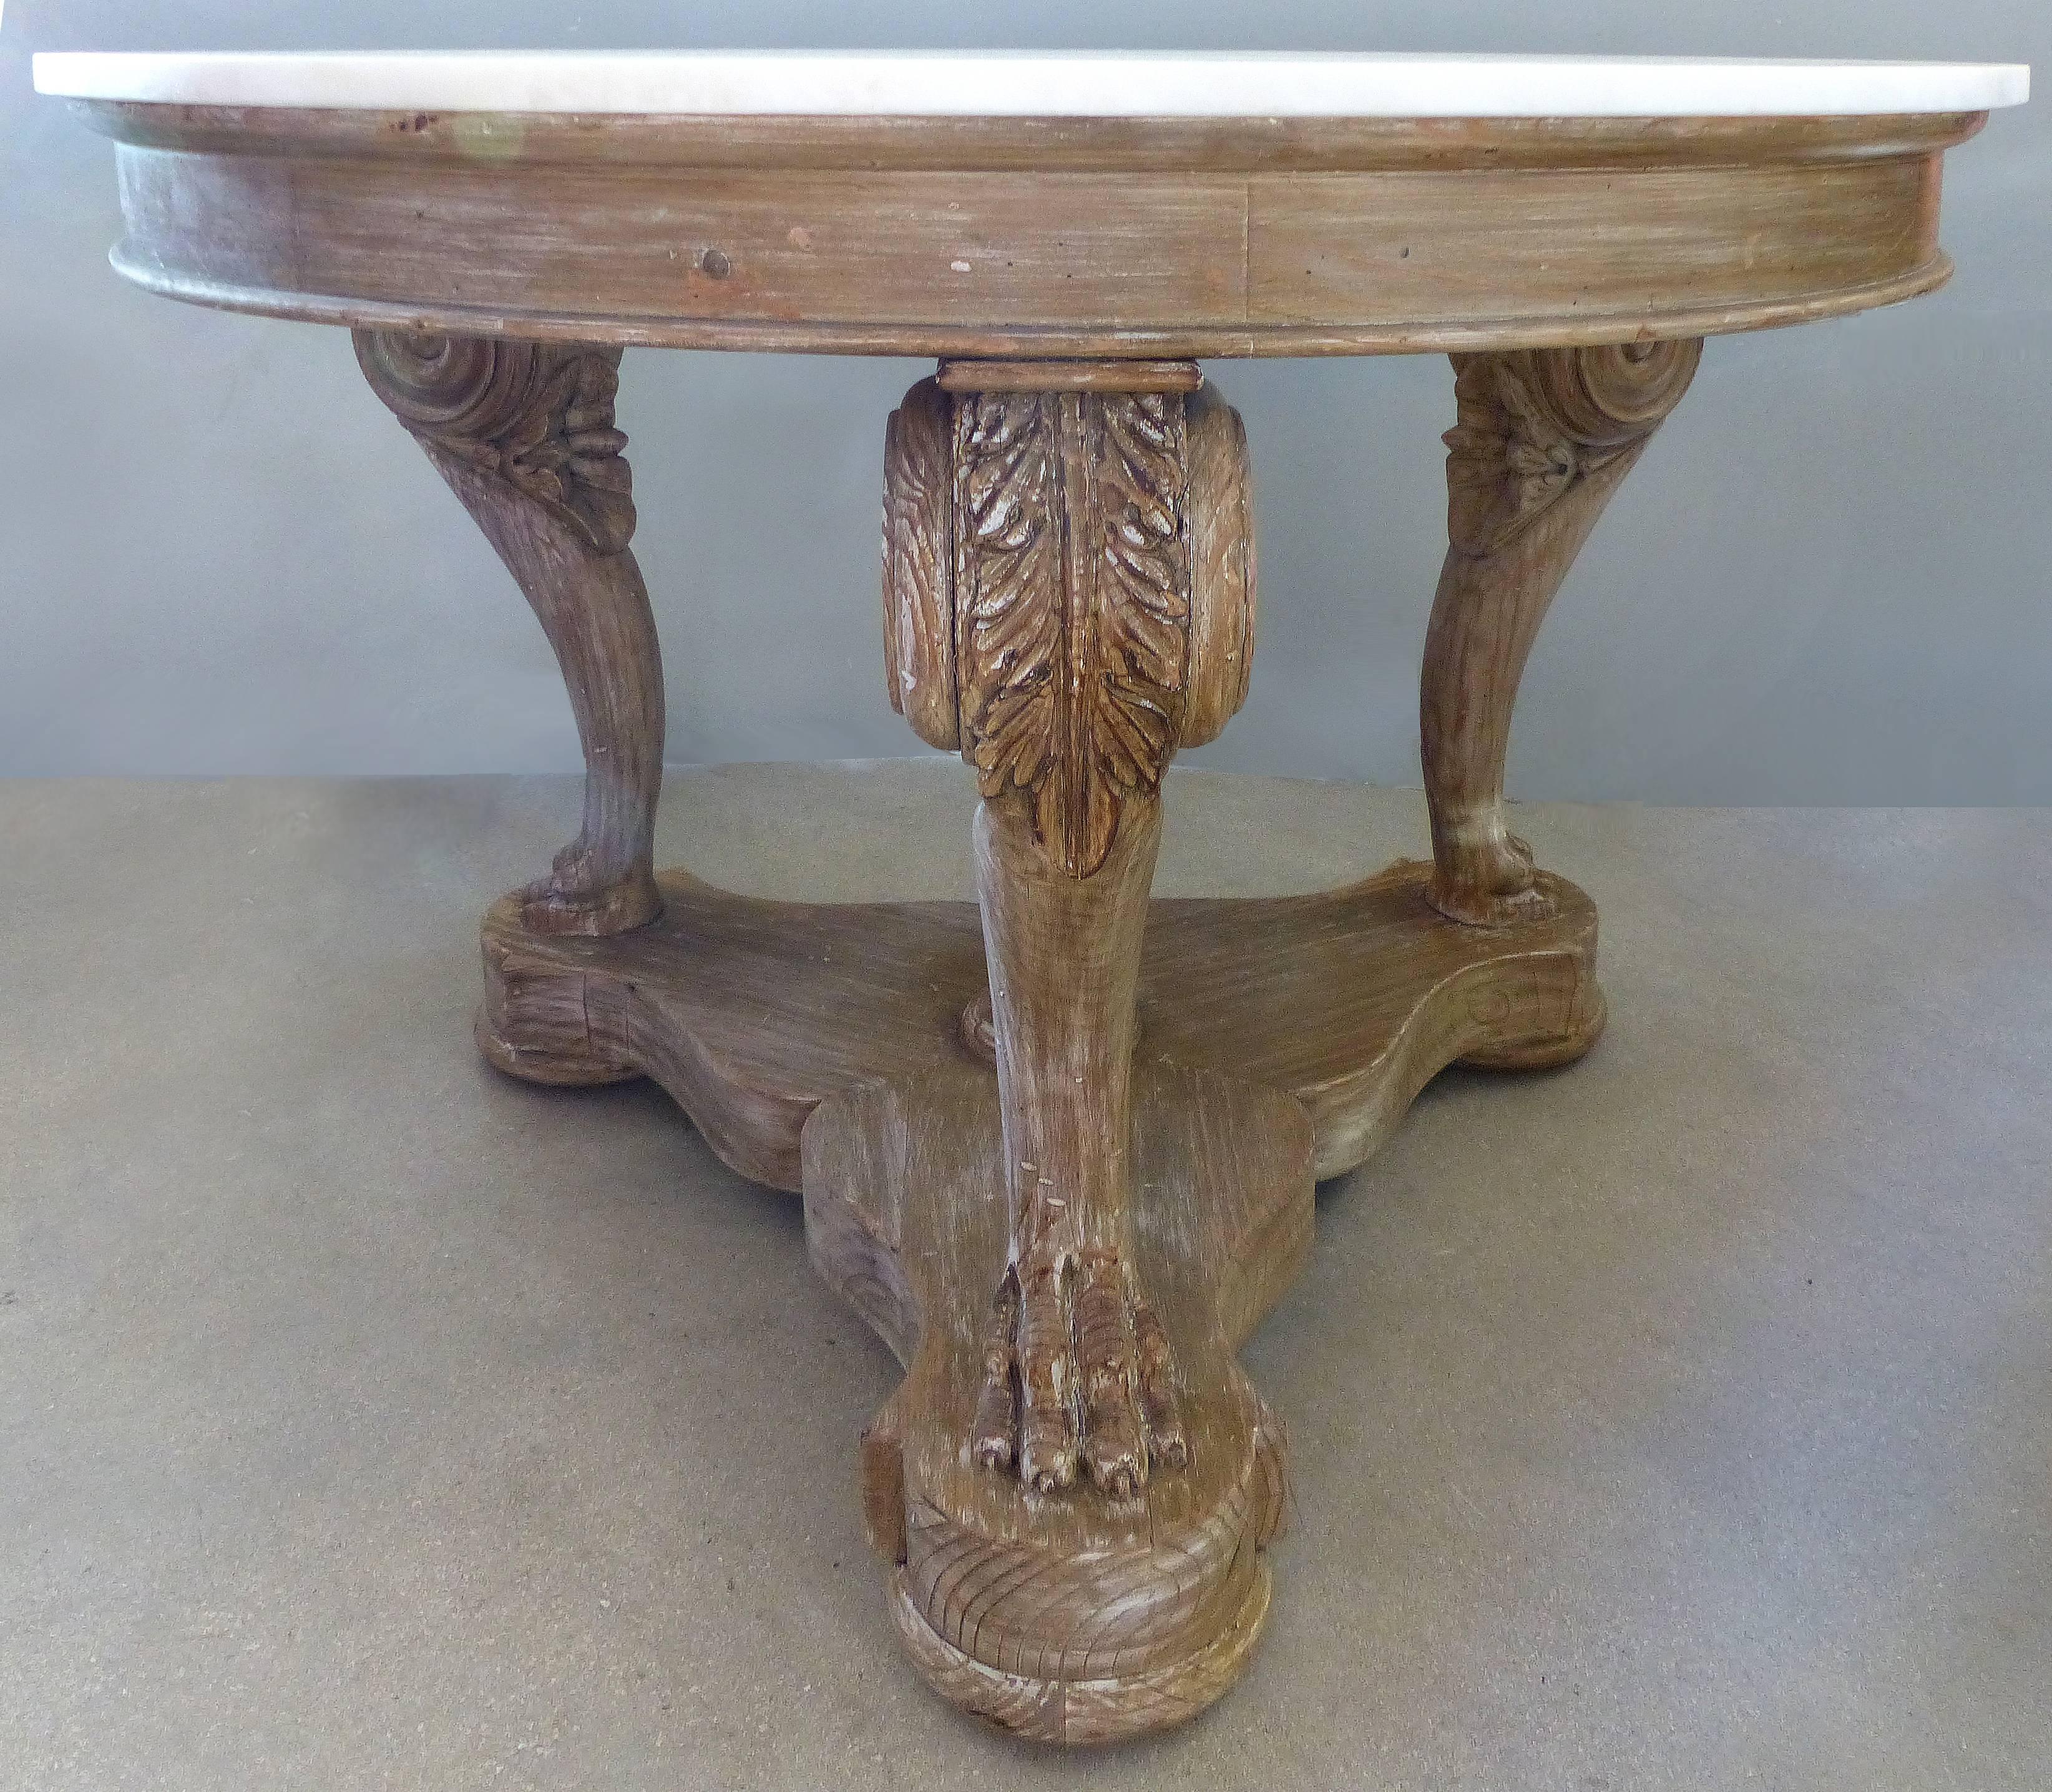 William Switzer 'Vancouver, B.C. Hand-Crafted Marbletop Center Table

Offered for sale is a carved center table with a white-washed finish and marble top handcrafted by William Switzer of Vancouver, British Columbia. The top is supported by three